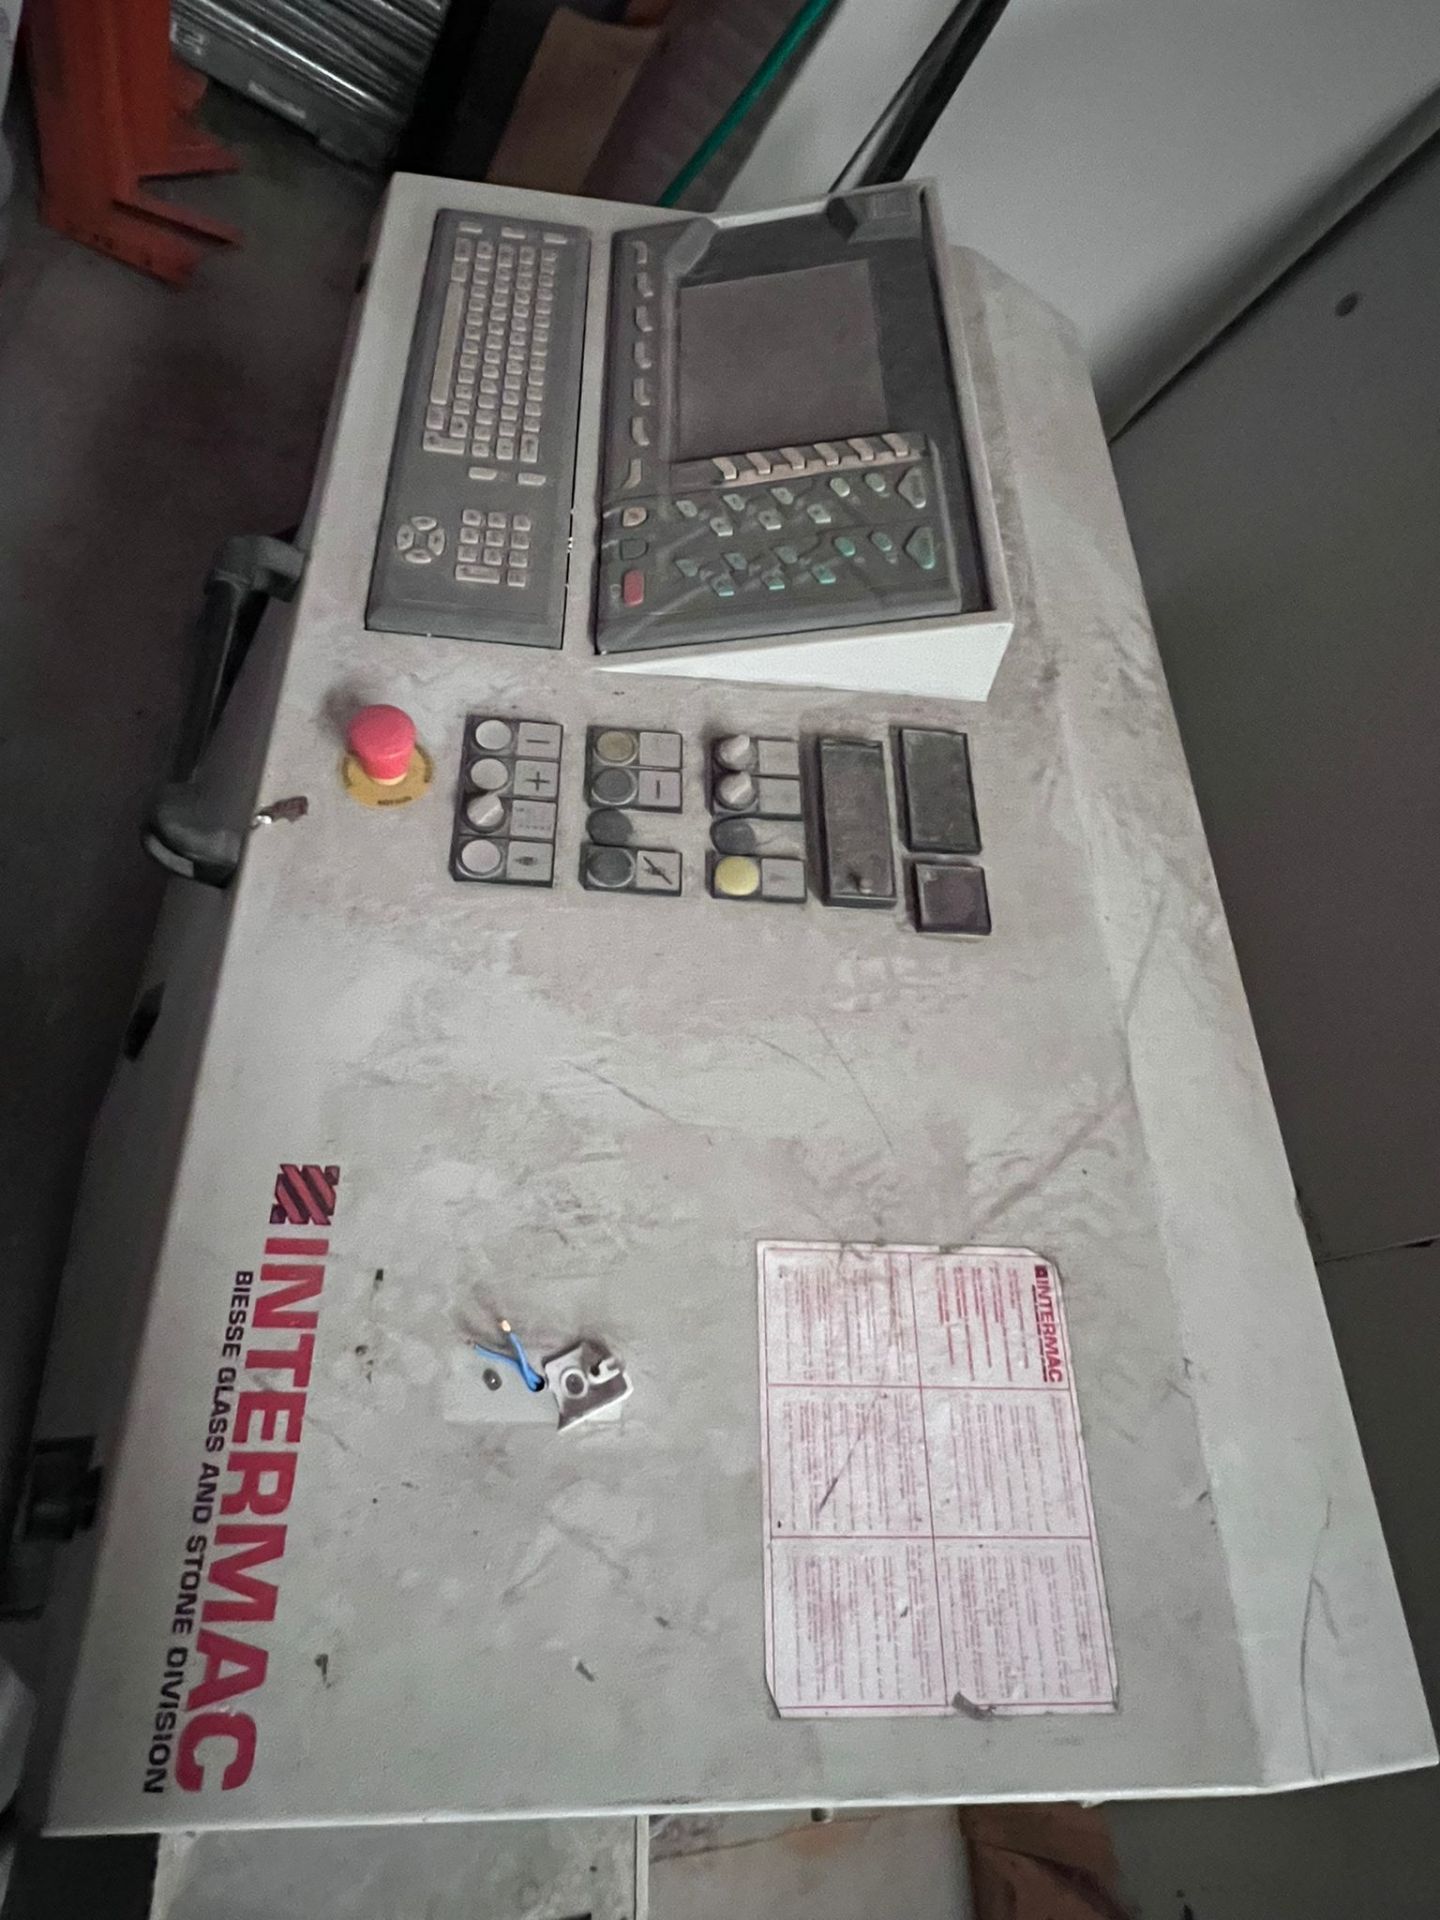 Special 5% Buyers Premium Intermac compact stone CNC machine serial no. 90775 with a Broomwade - Image 5 of 9